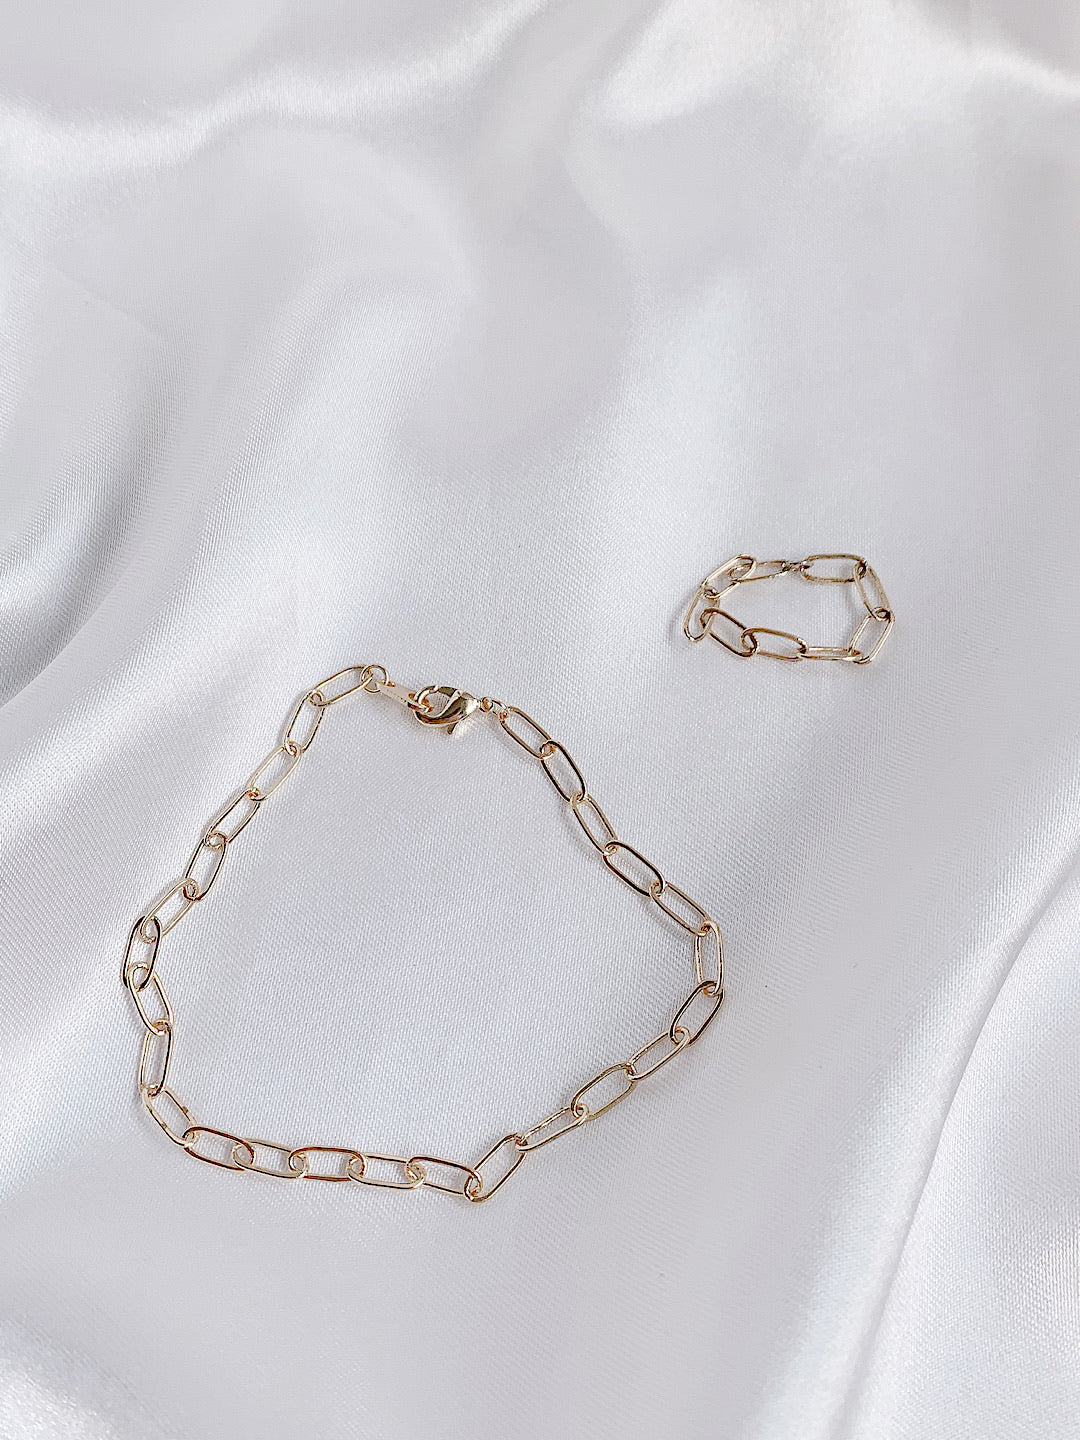 Rhoda Chain Bracelet, 14k gold-plated (made to order)